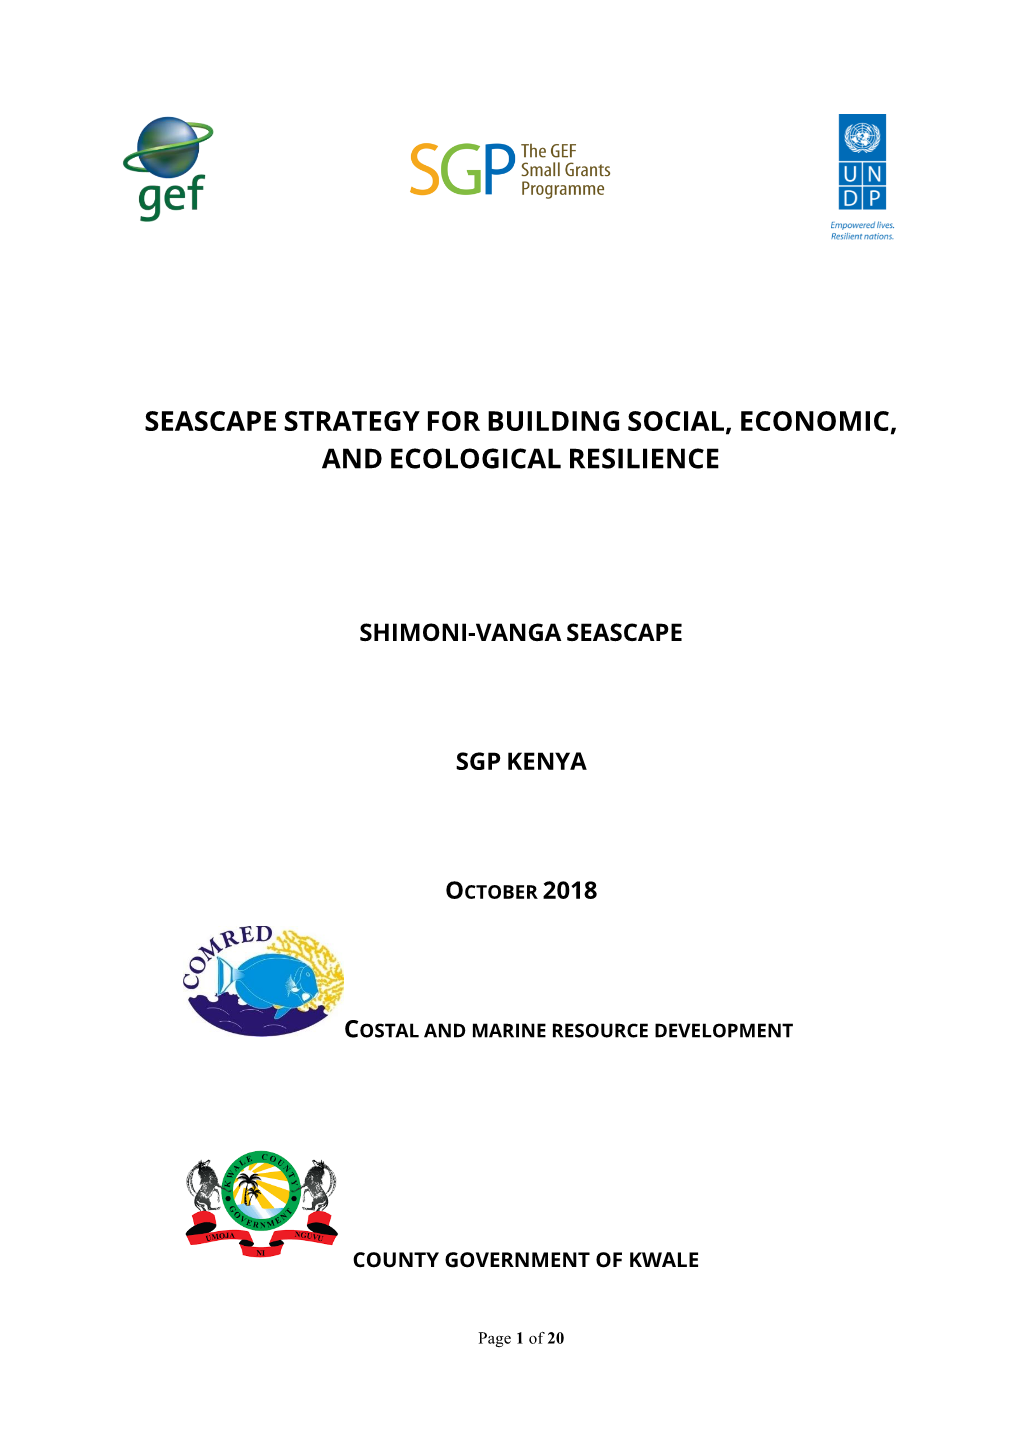 Seascape Strategy for Building Social, Economic, and Ecological Resilience